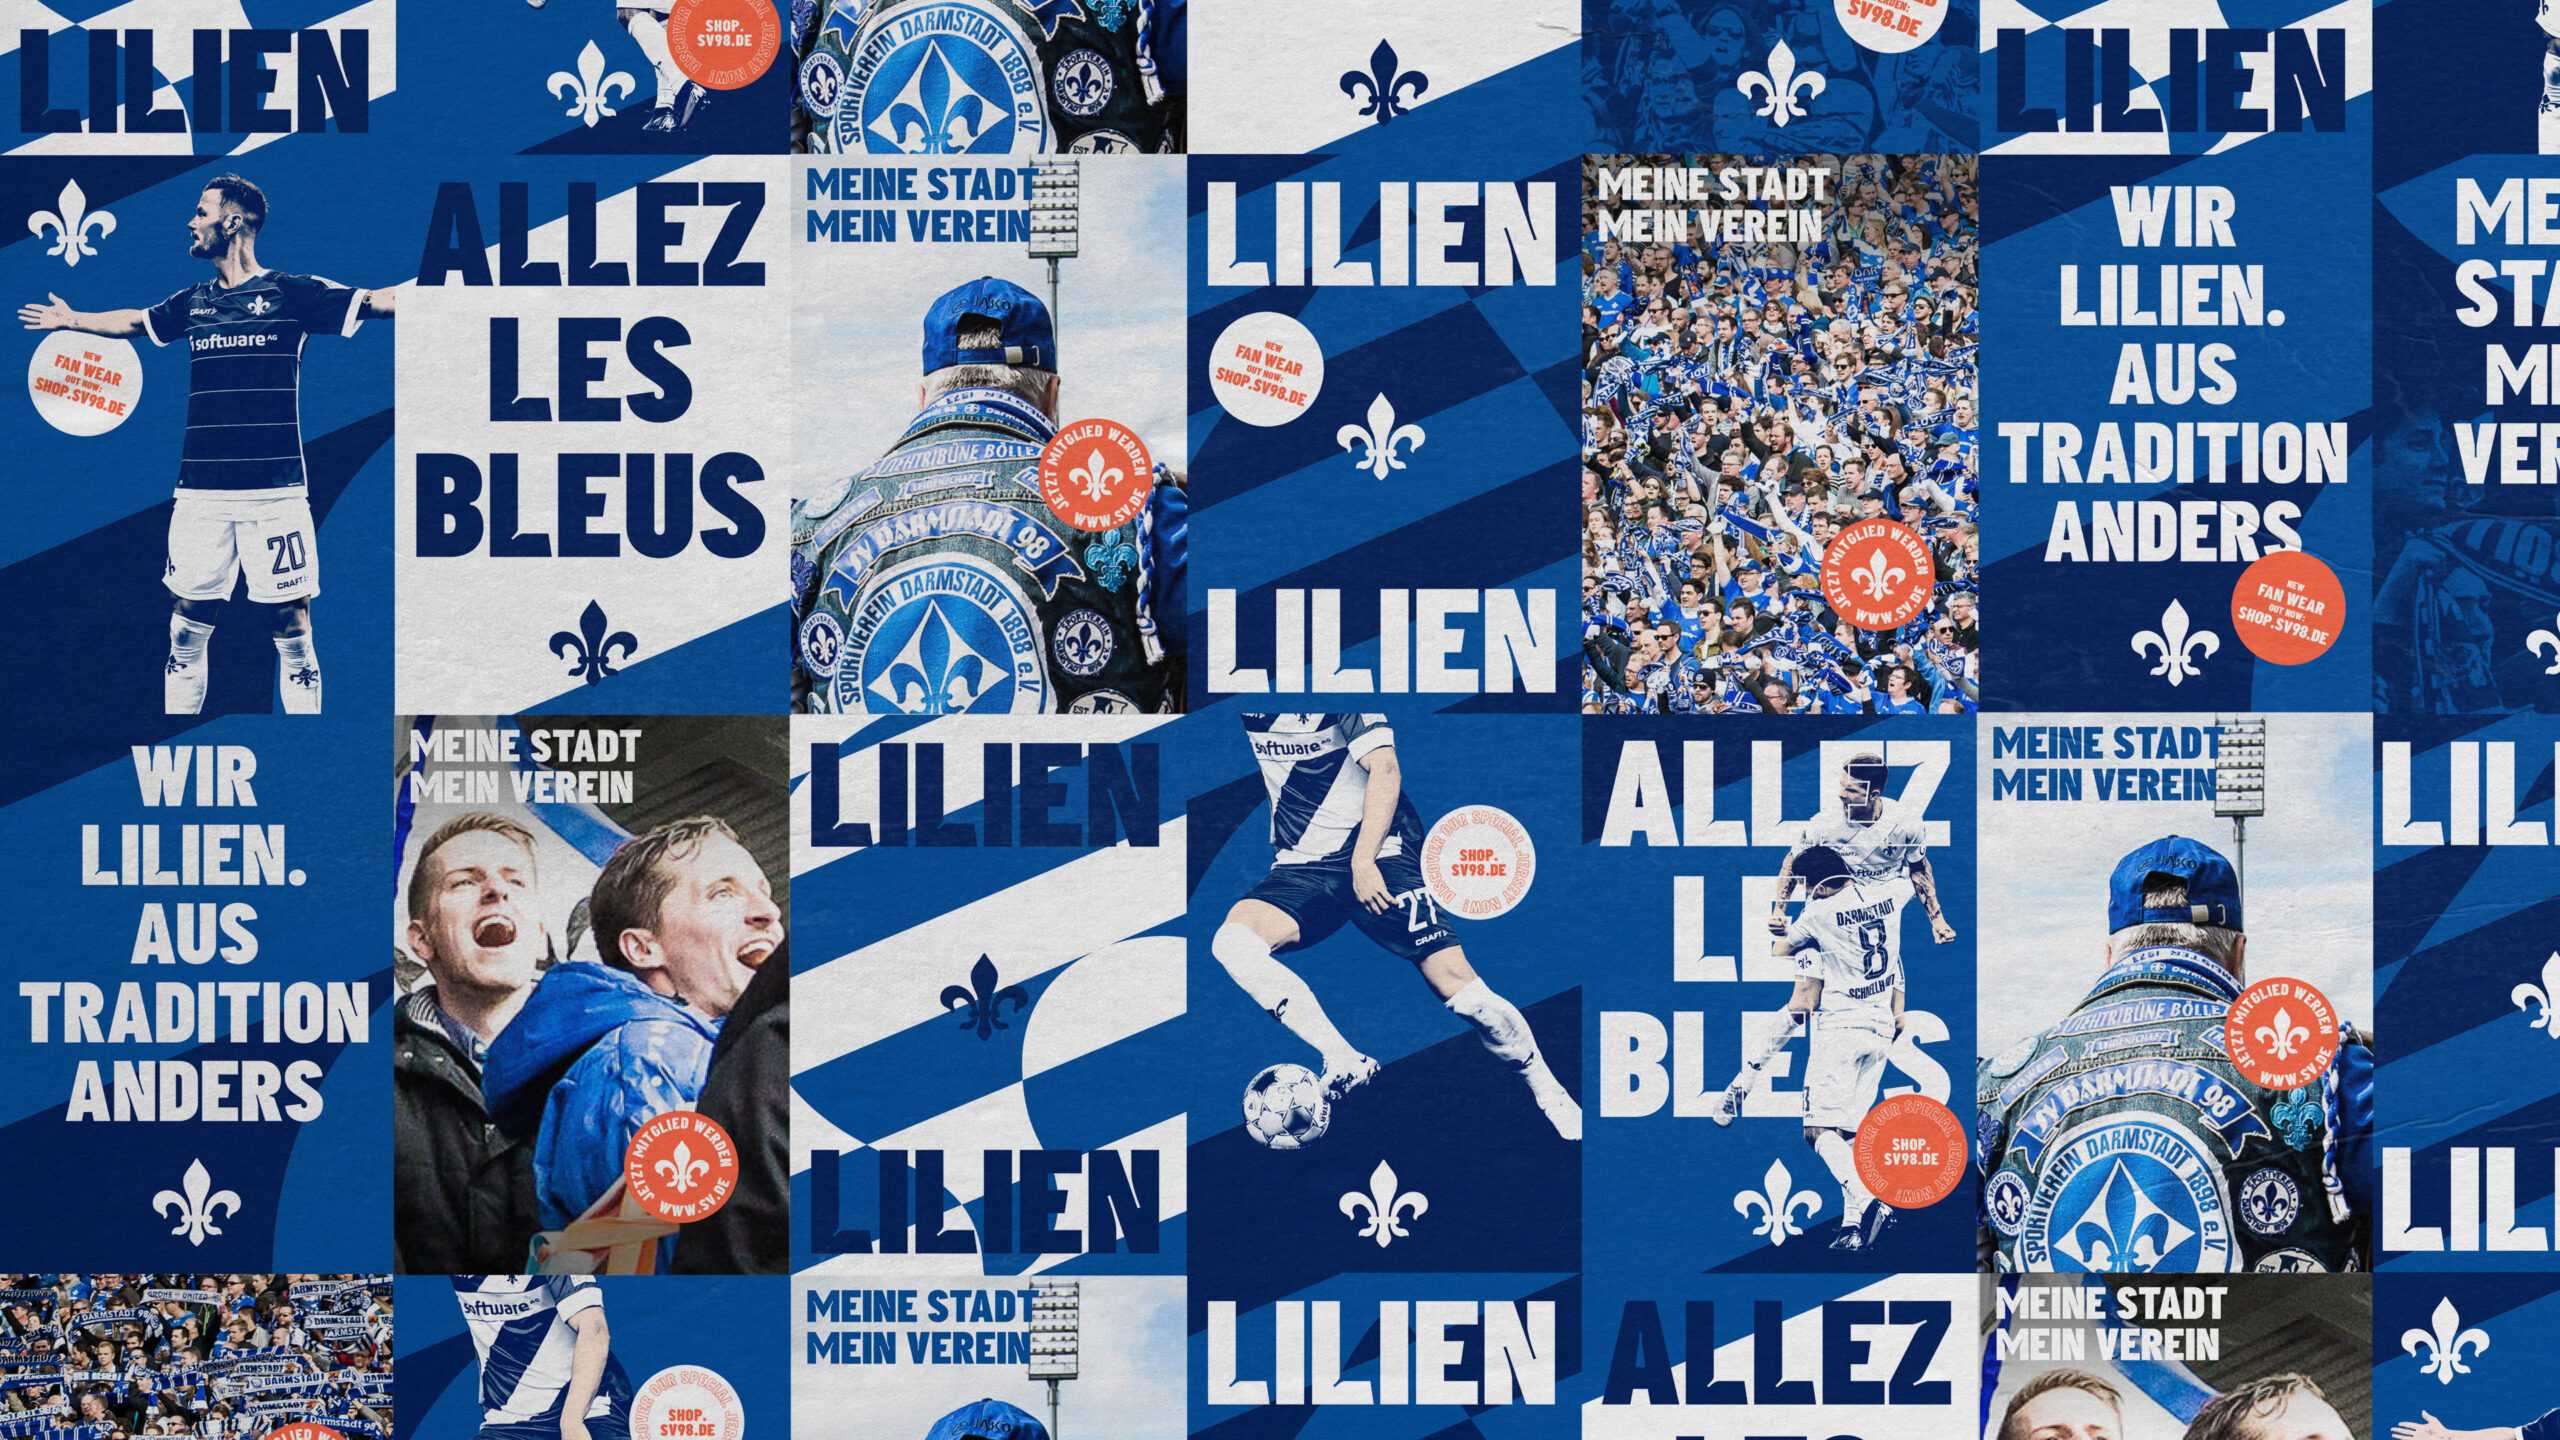 Posterwall with posters from SV Darmstadt 98